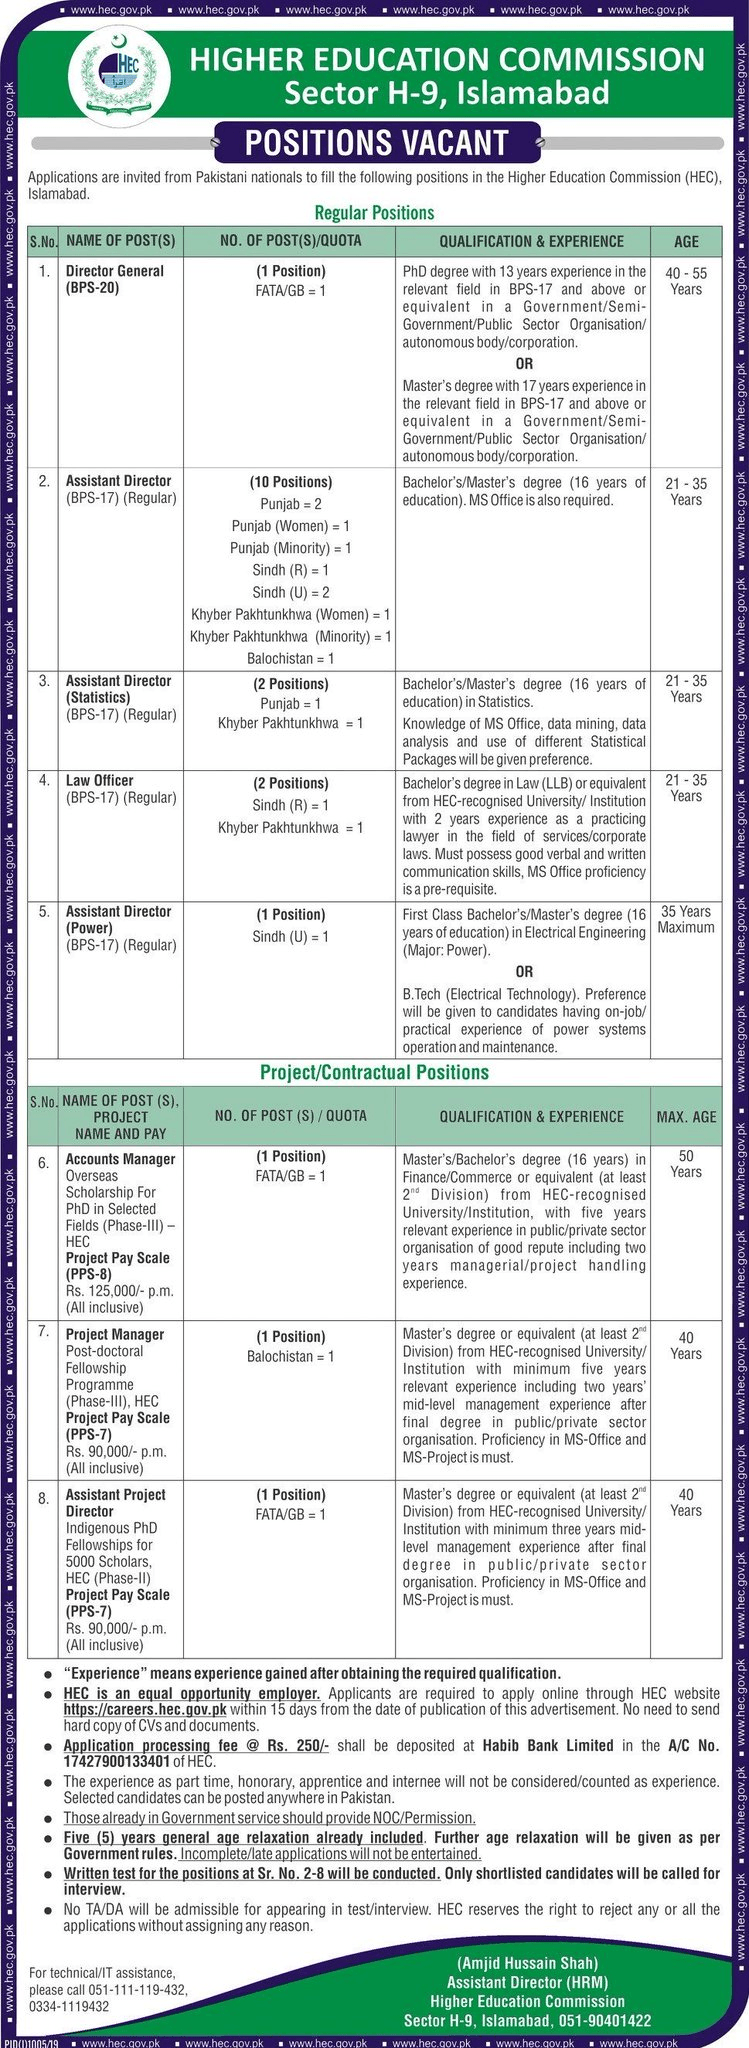 Vacancies in Higher Education Commission 2019